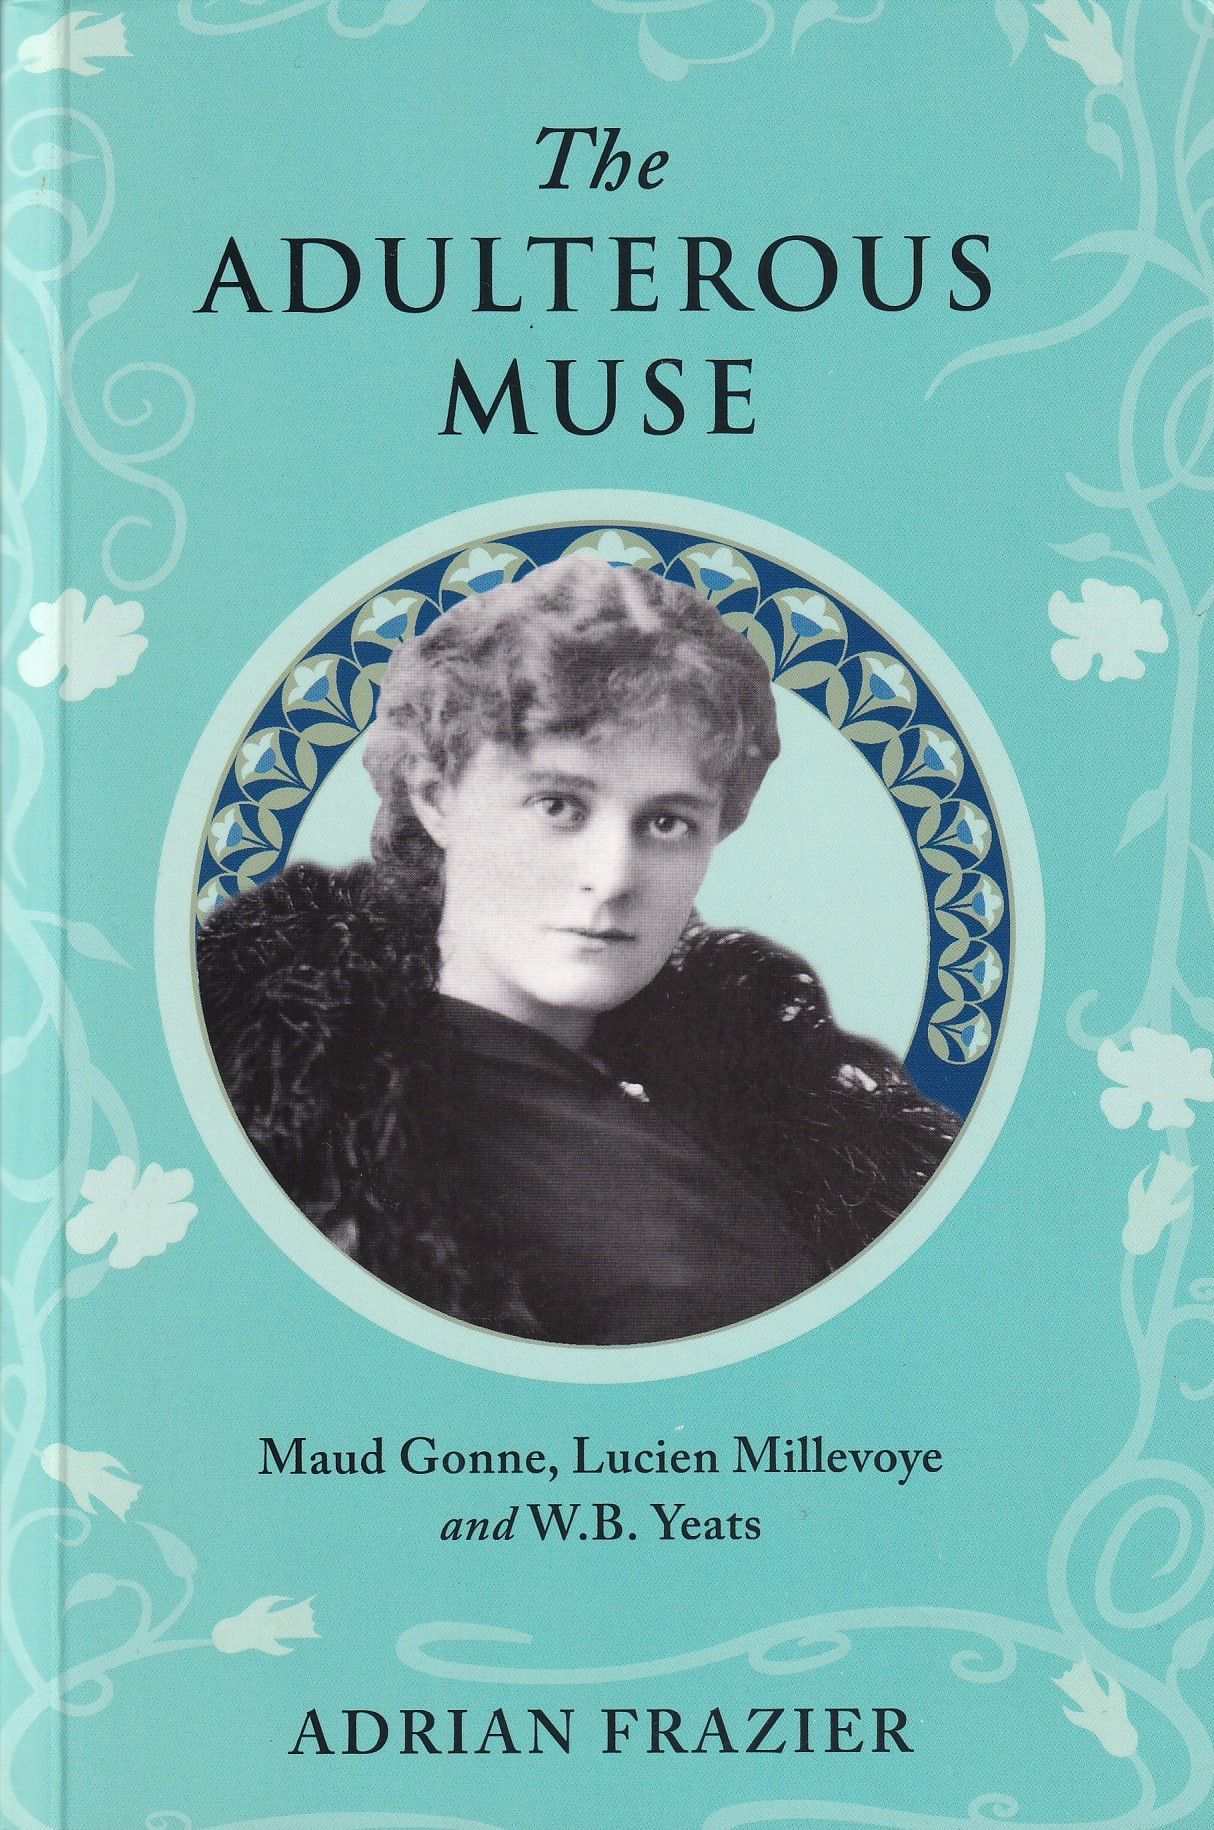 The Adulterous Muse: Maude Gonne, Lucien Millevoye and W.B. Yeats [Signed] | Adrian Frazier | Charlie Byrne's